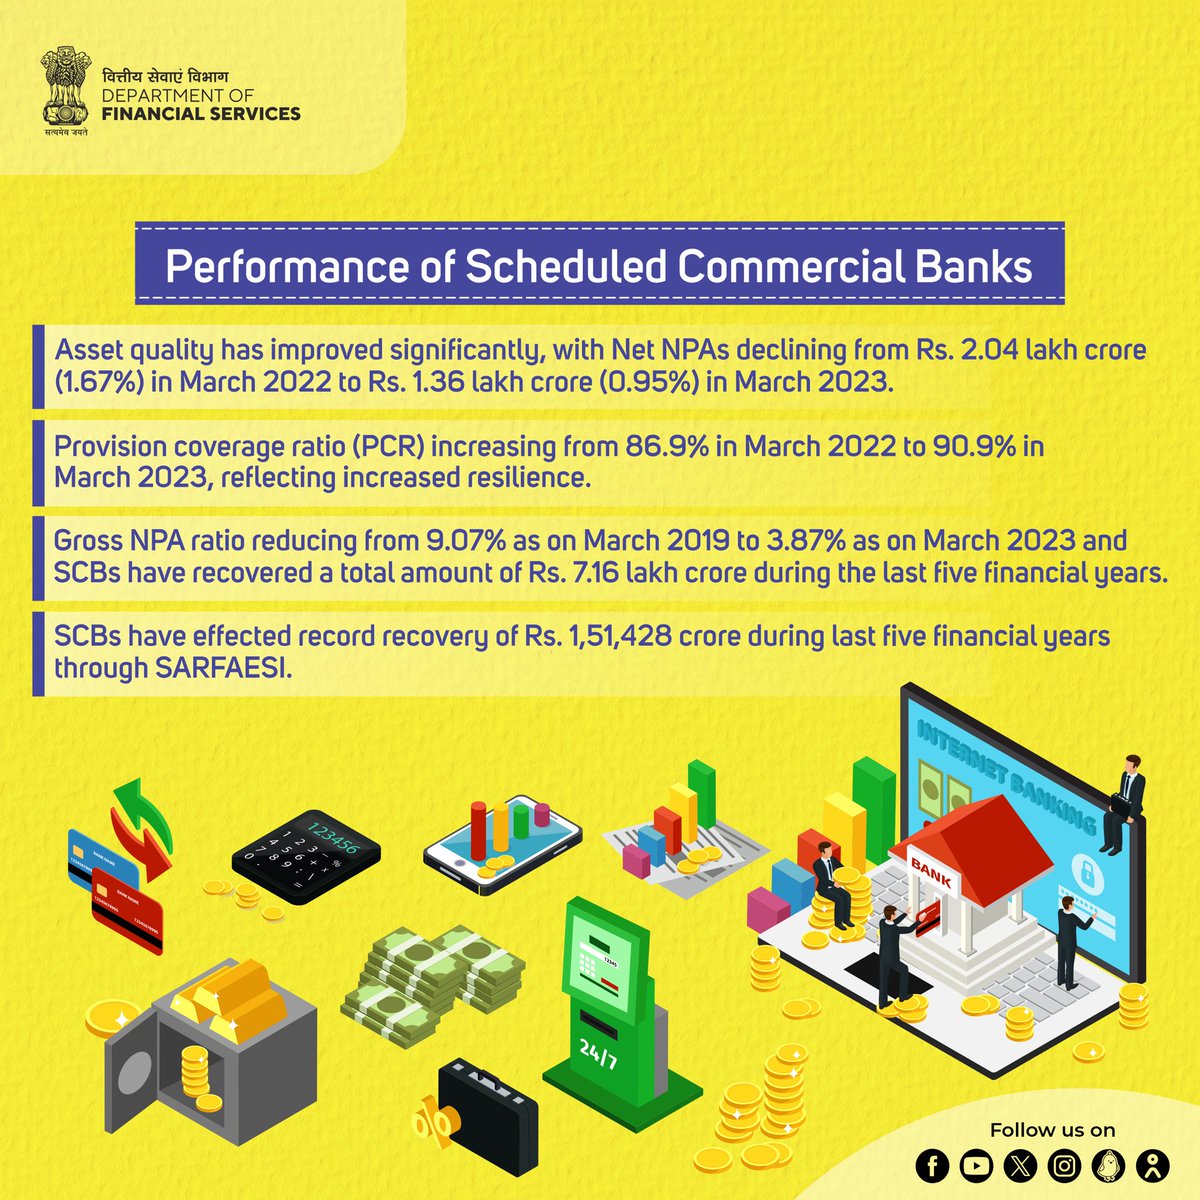 Scheduled Commercial Banks #SCBs have recorded gross NPA ratio reducing to 3.87% as on March 2023 from 9.07% as on March 2019.

#PerformanceofSCBs 
#ViksitBharat 
#FinMinReview2023